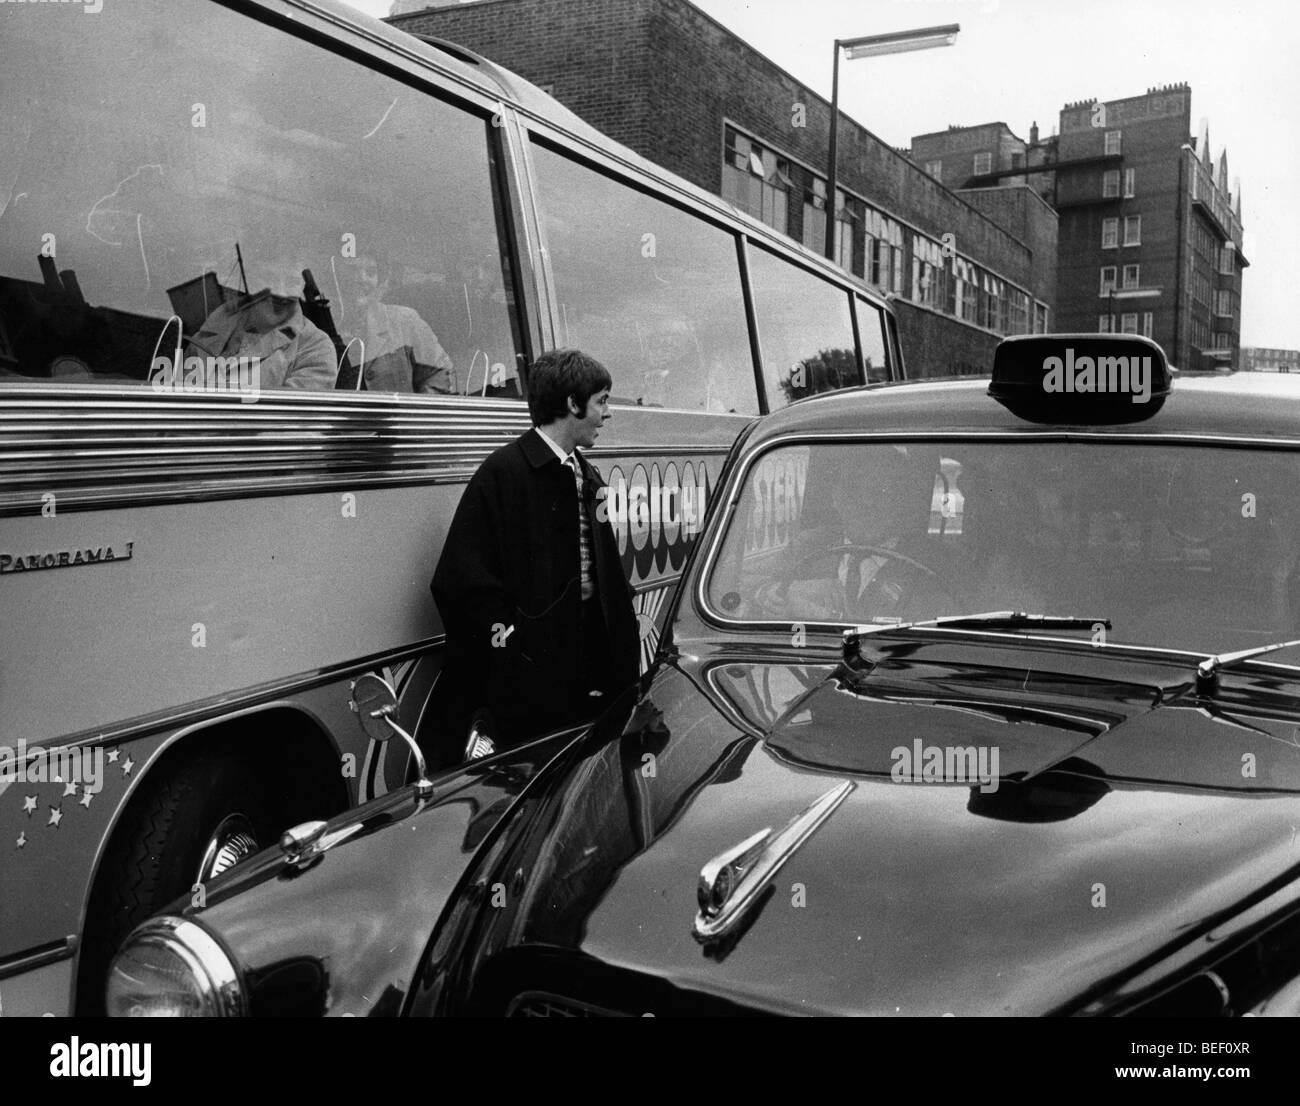 Singer Paul McCartney with 'Magical Mystery Tour' bus Stock Photo